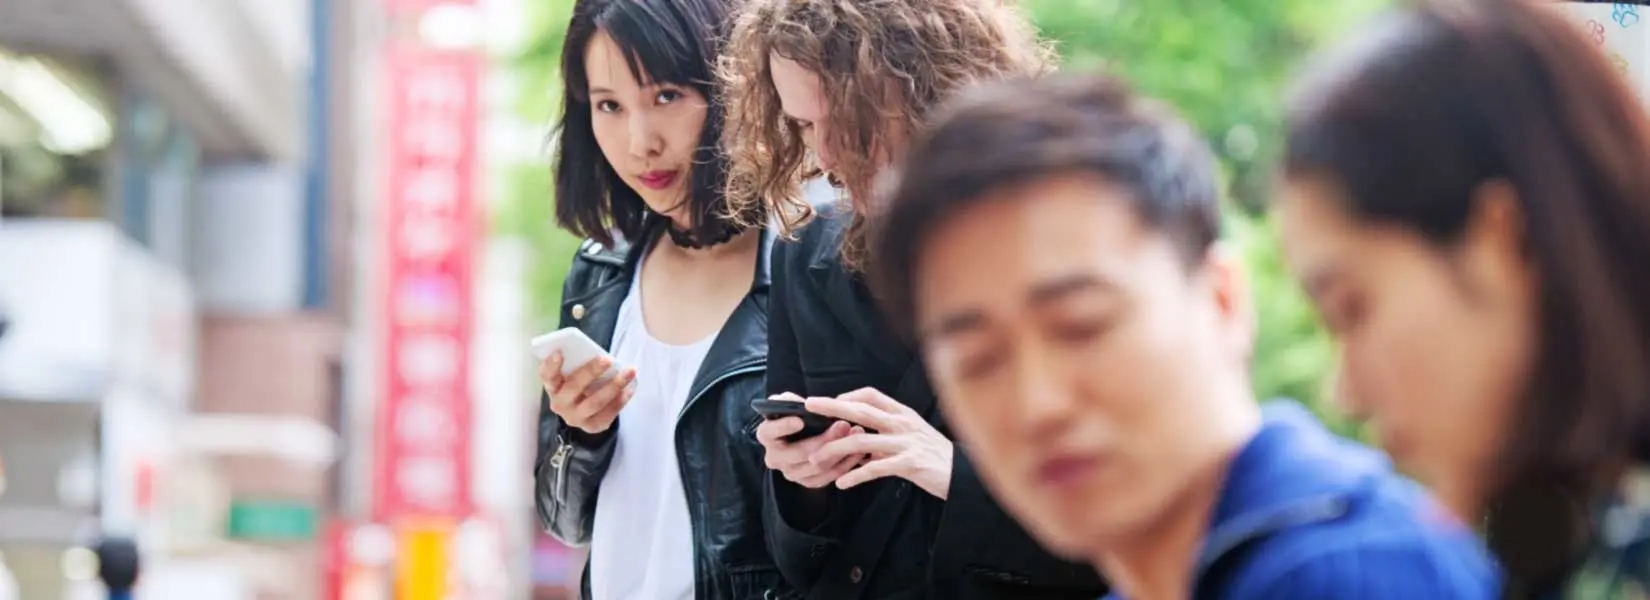 Two individuals on their phones while two blurred people are having a conversation in the foreground